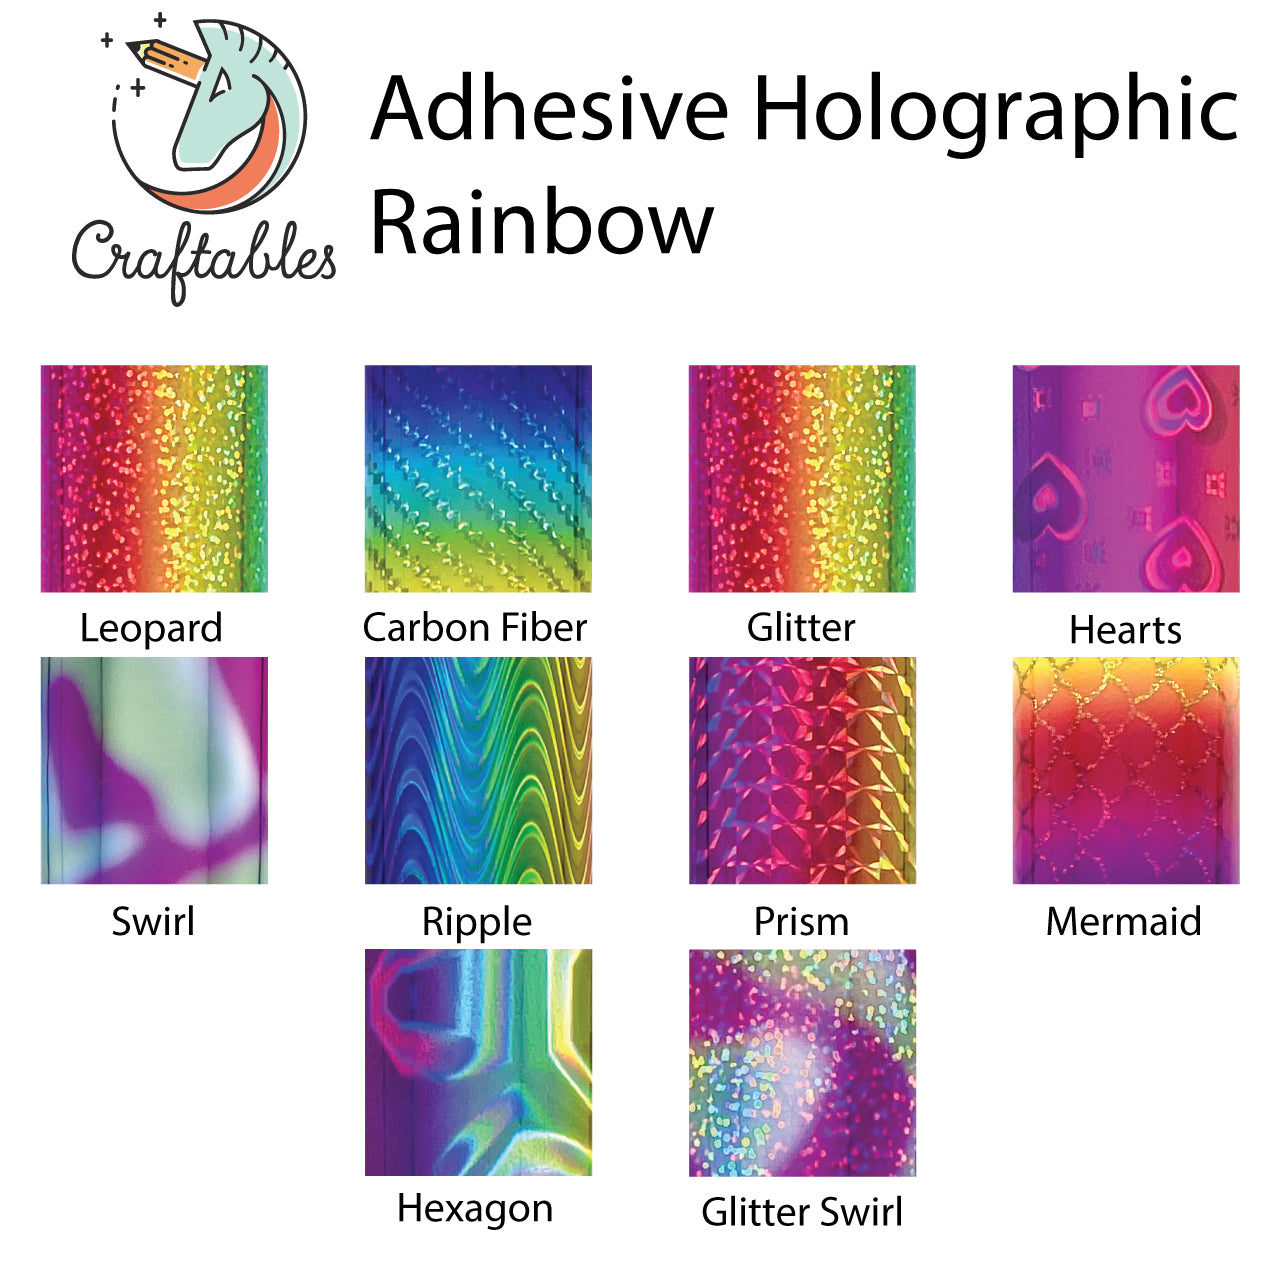 Blue Holographic Iridescent Adhesive Vinyl Sheets By Craftables